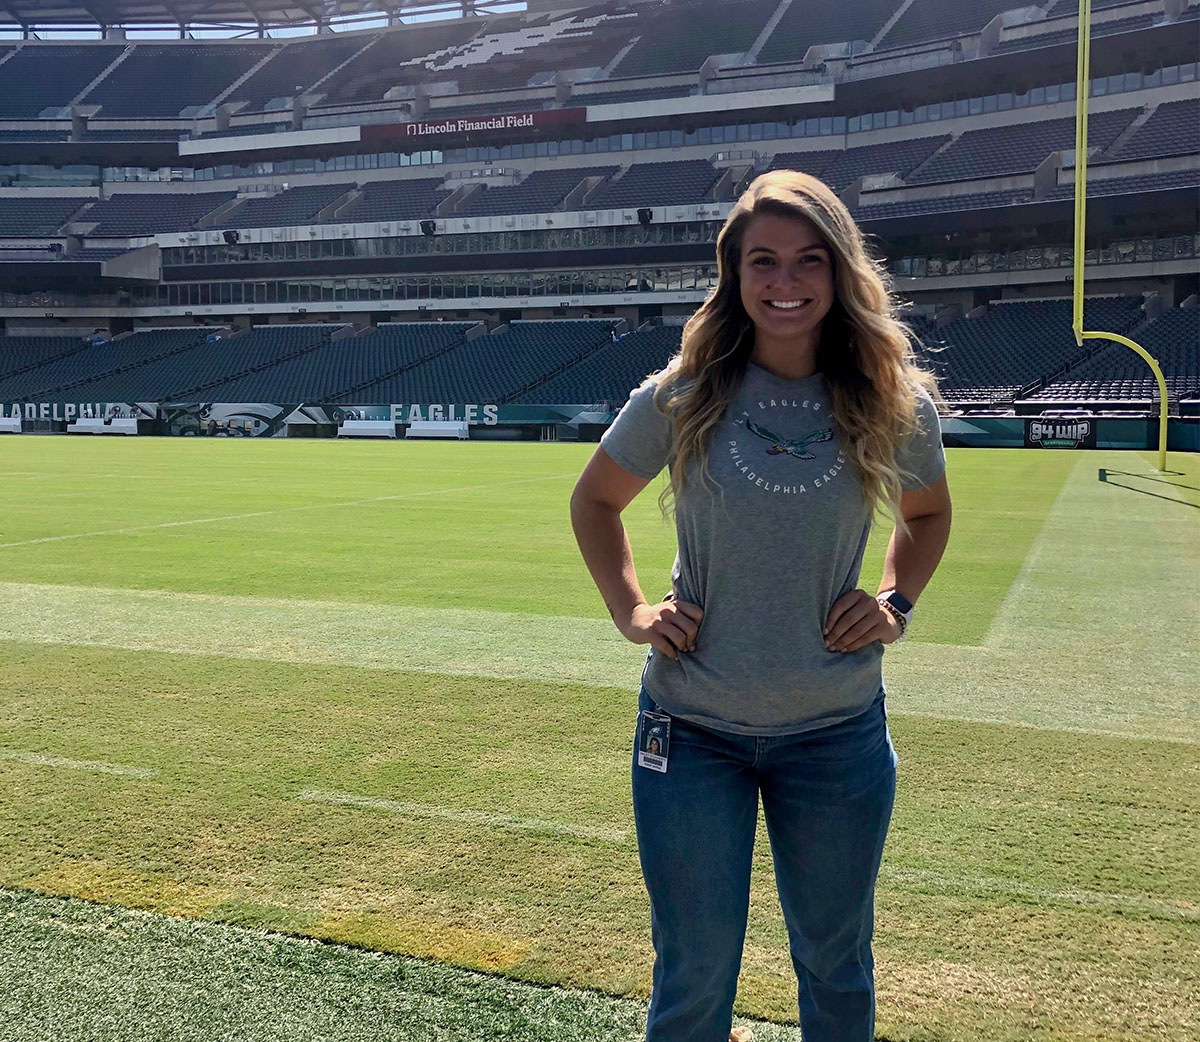 Hailey Dougherty interned at Lincoln Financial Field